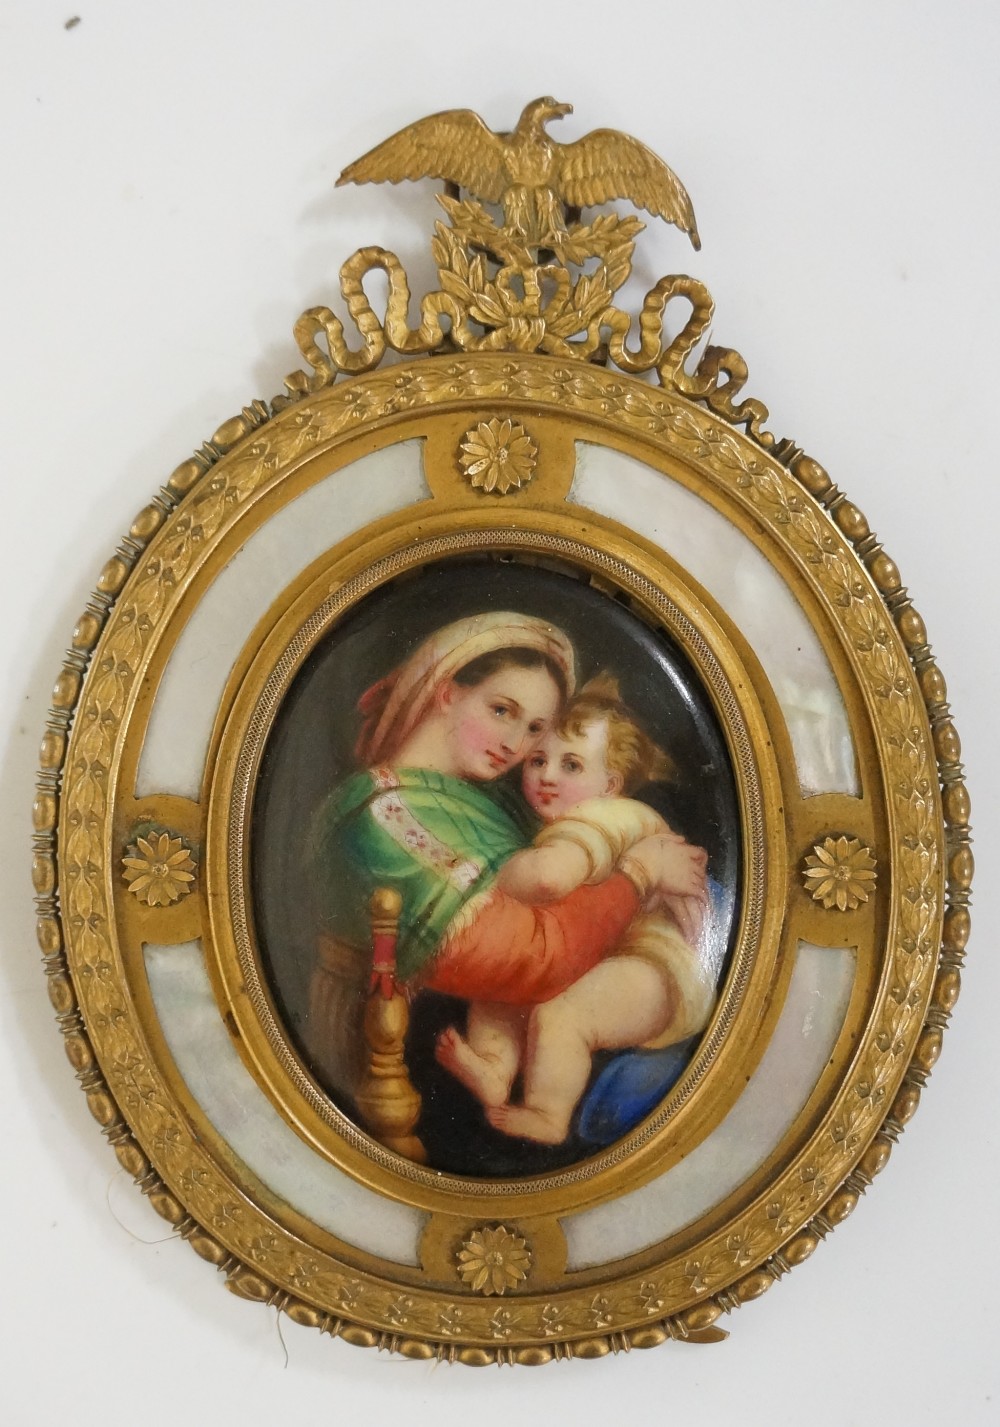 A continental oval porcelain plaque decorated with Madonna and child contained within an ornate